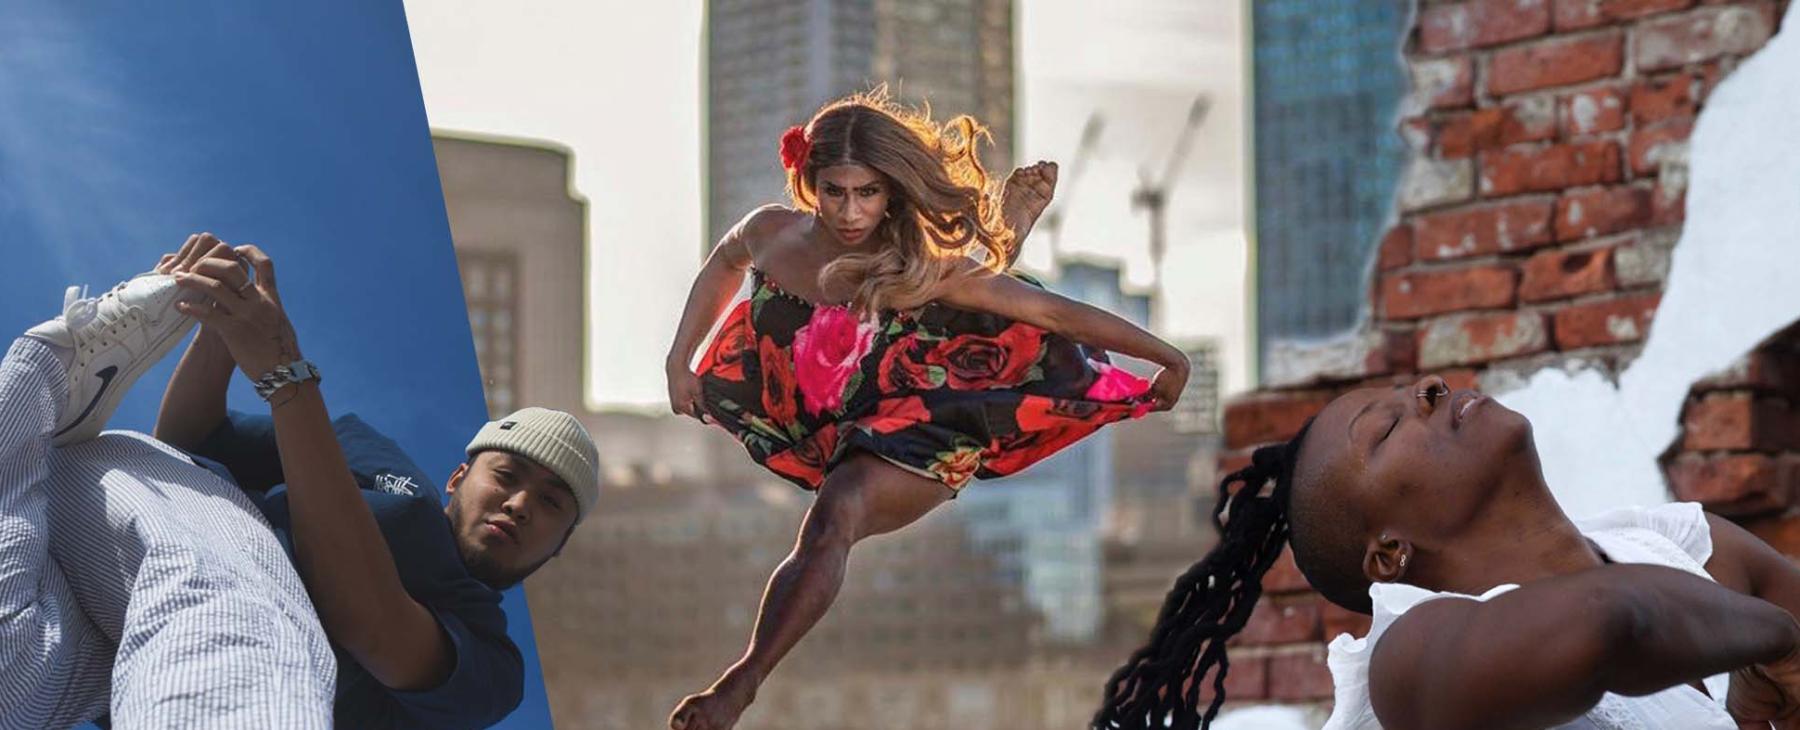 A collage of three images: a young, Asian man holds his leg up, a Black woman leaps, in a ruby-toned, floral dress at the Boston waterfront, and a Black woman leans back, her braids blowing in the wind.